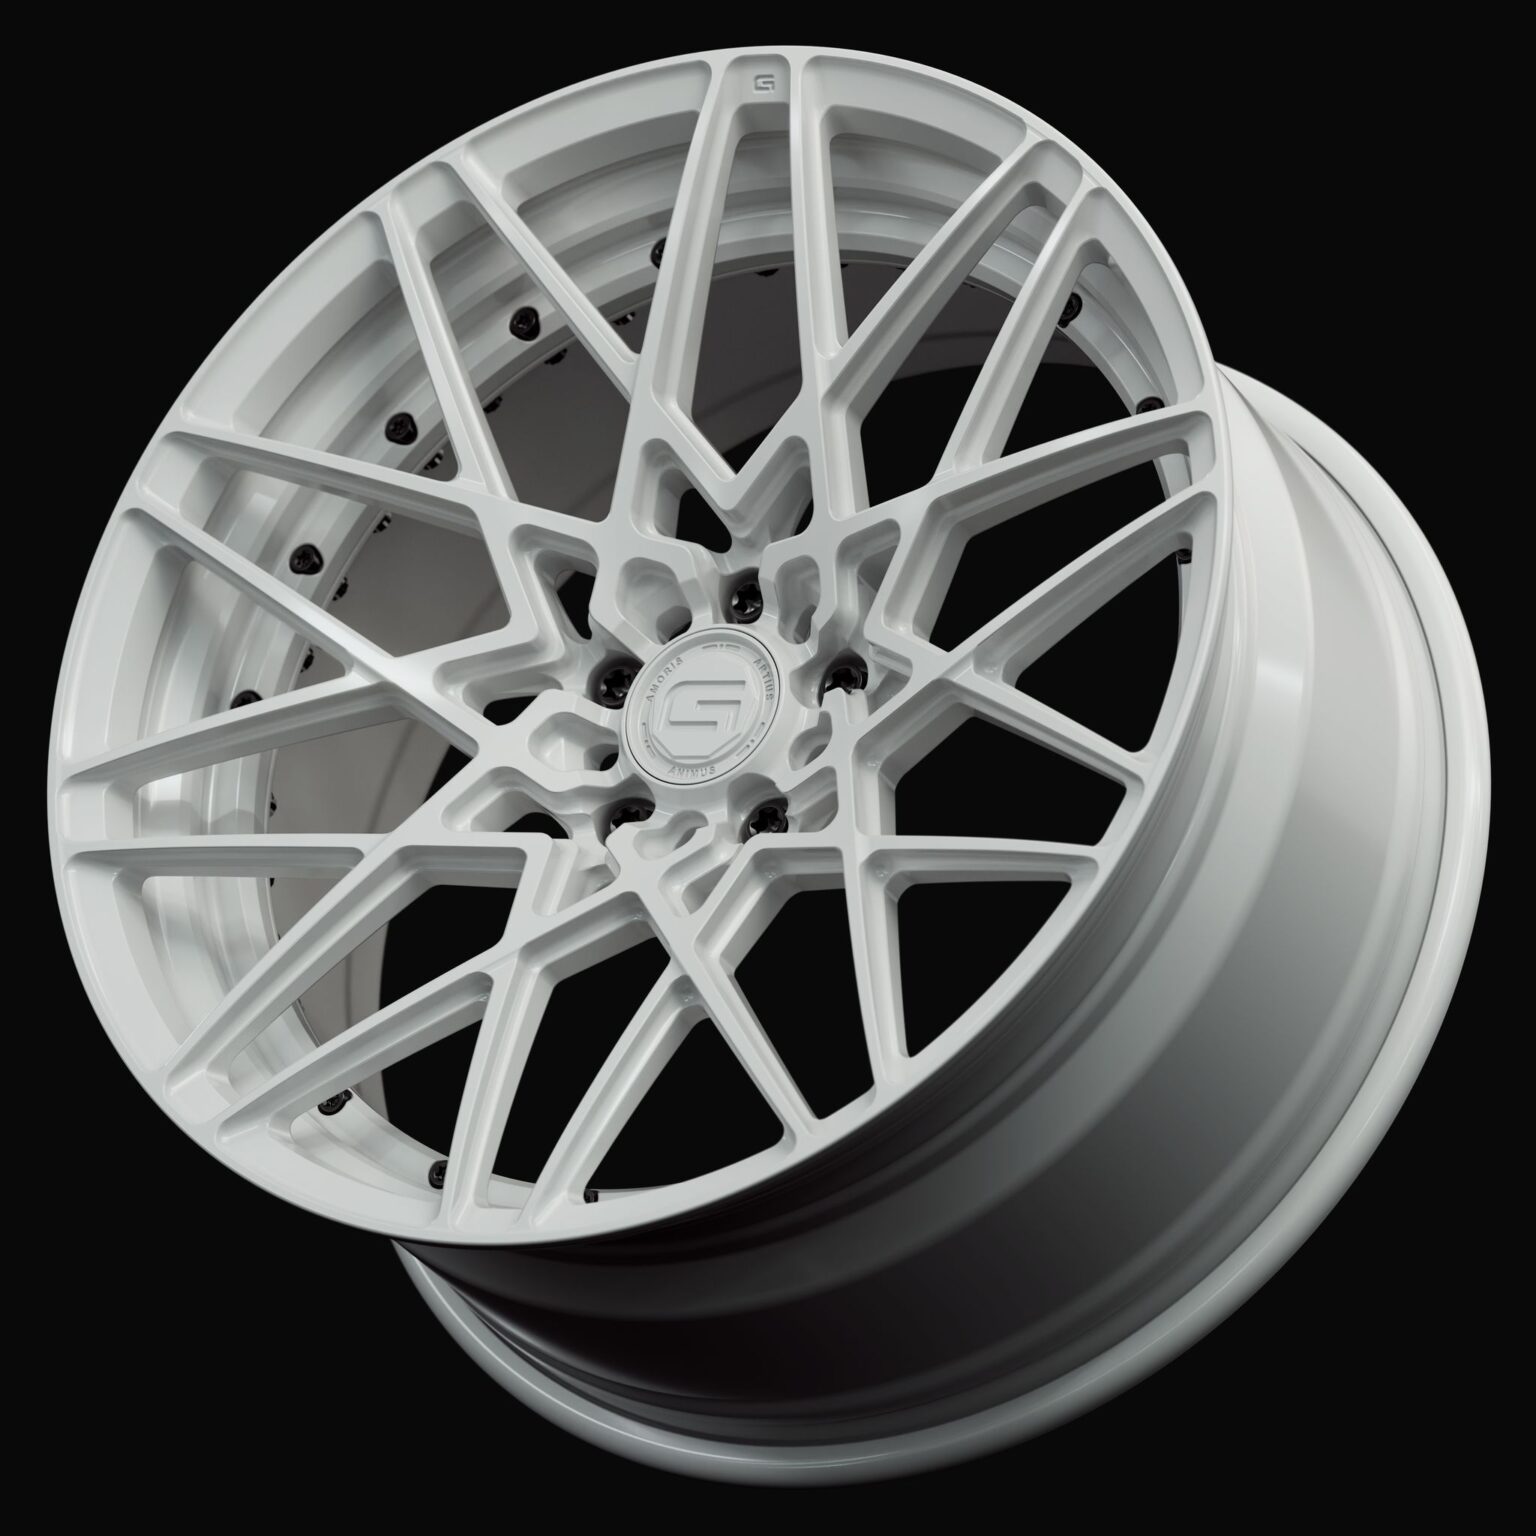 Three-quarter view of a white G53 duoblock wheel from Govad Forged Track series